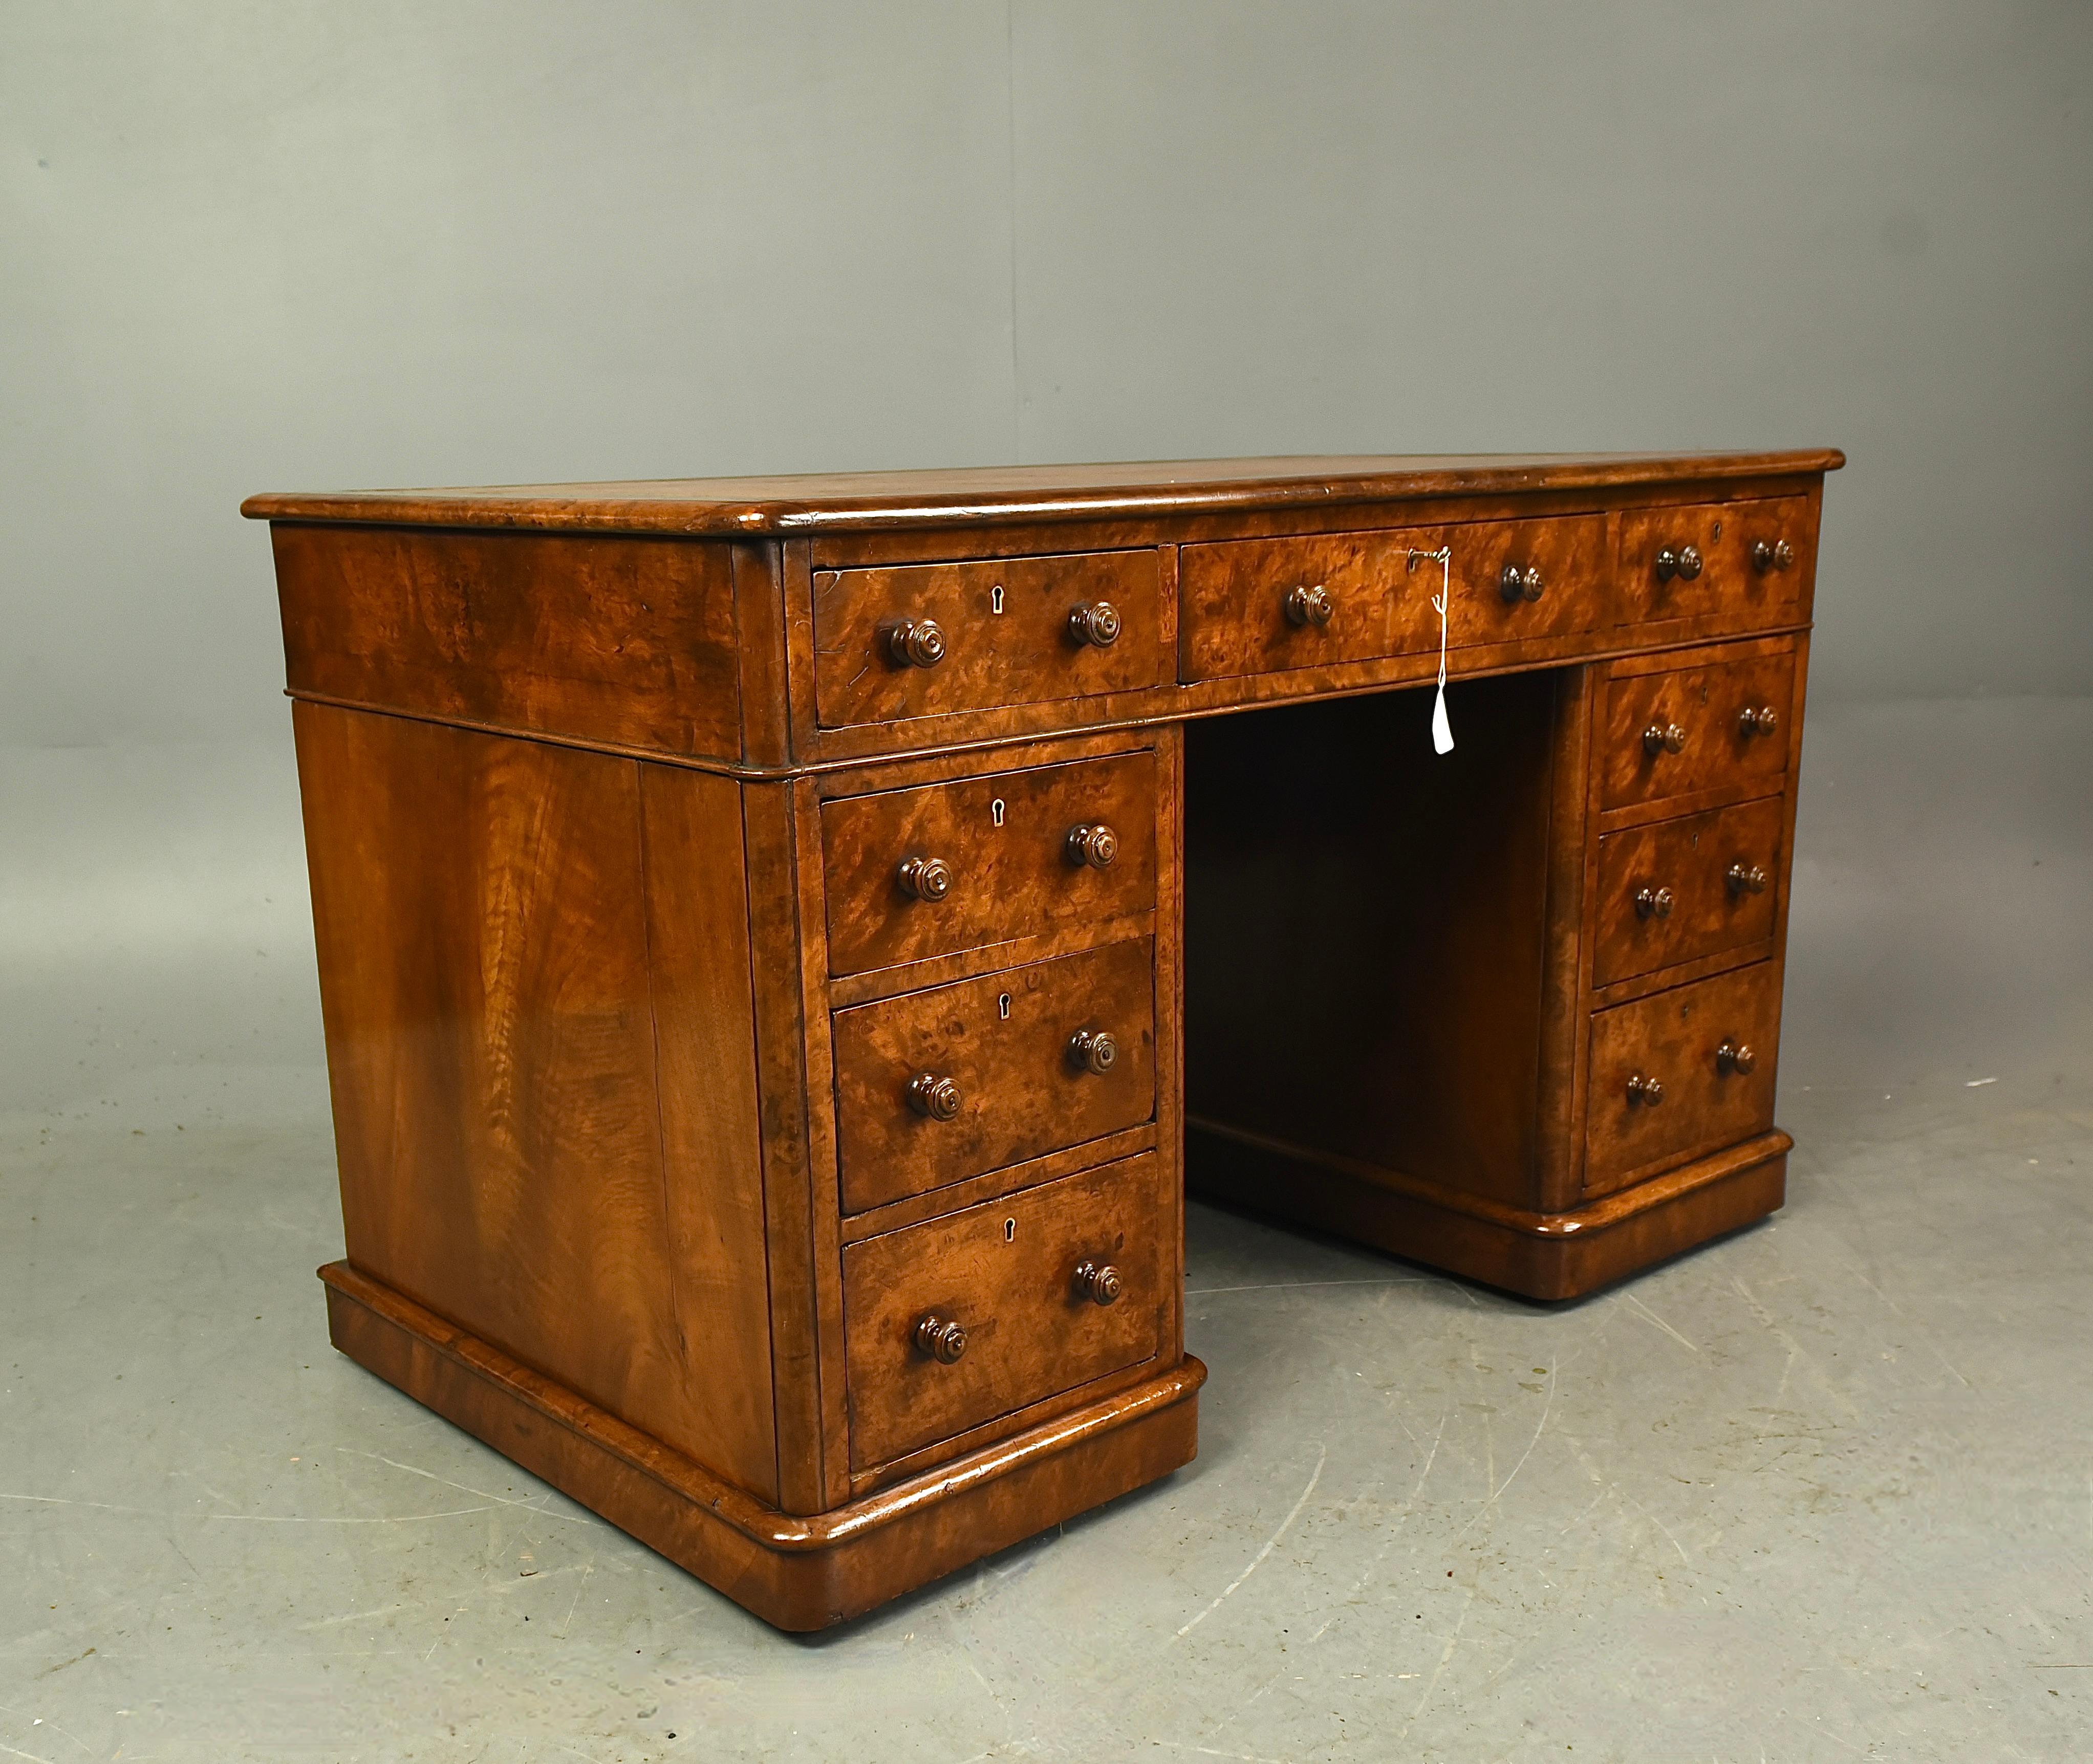 Fine quality Victorian burr walnut pedestal desk circa 1860 .
The desk has 9 drawers , the centre drawer has a working lock and key .and all drawers are solid in joint and slide nice and smooth as they should .The desk has a tan leather insert to